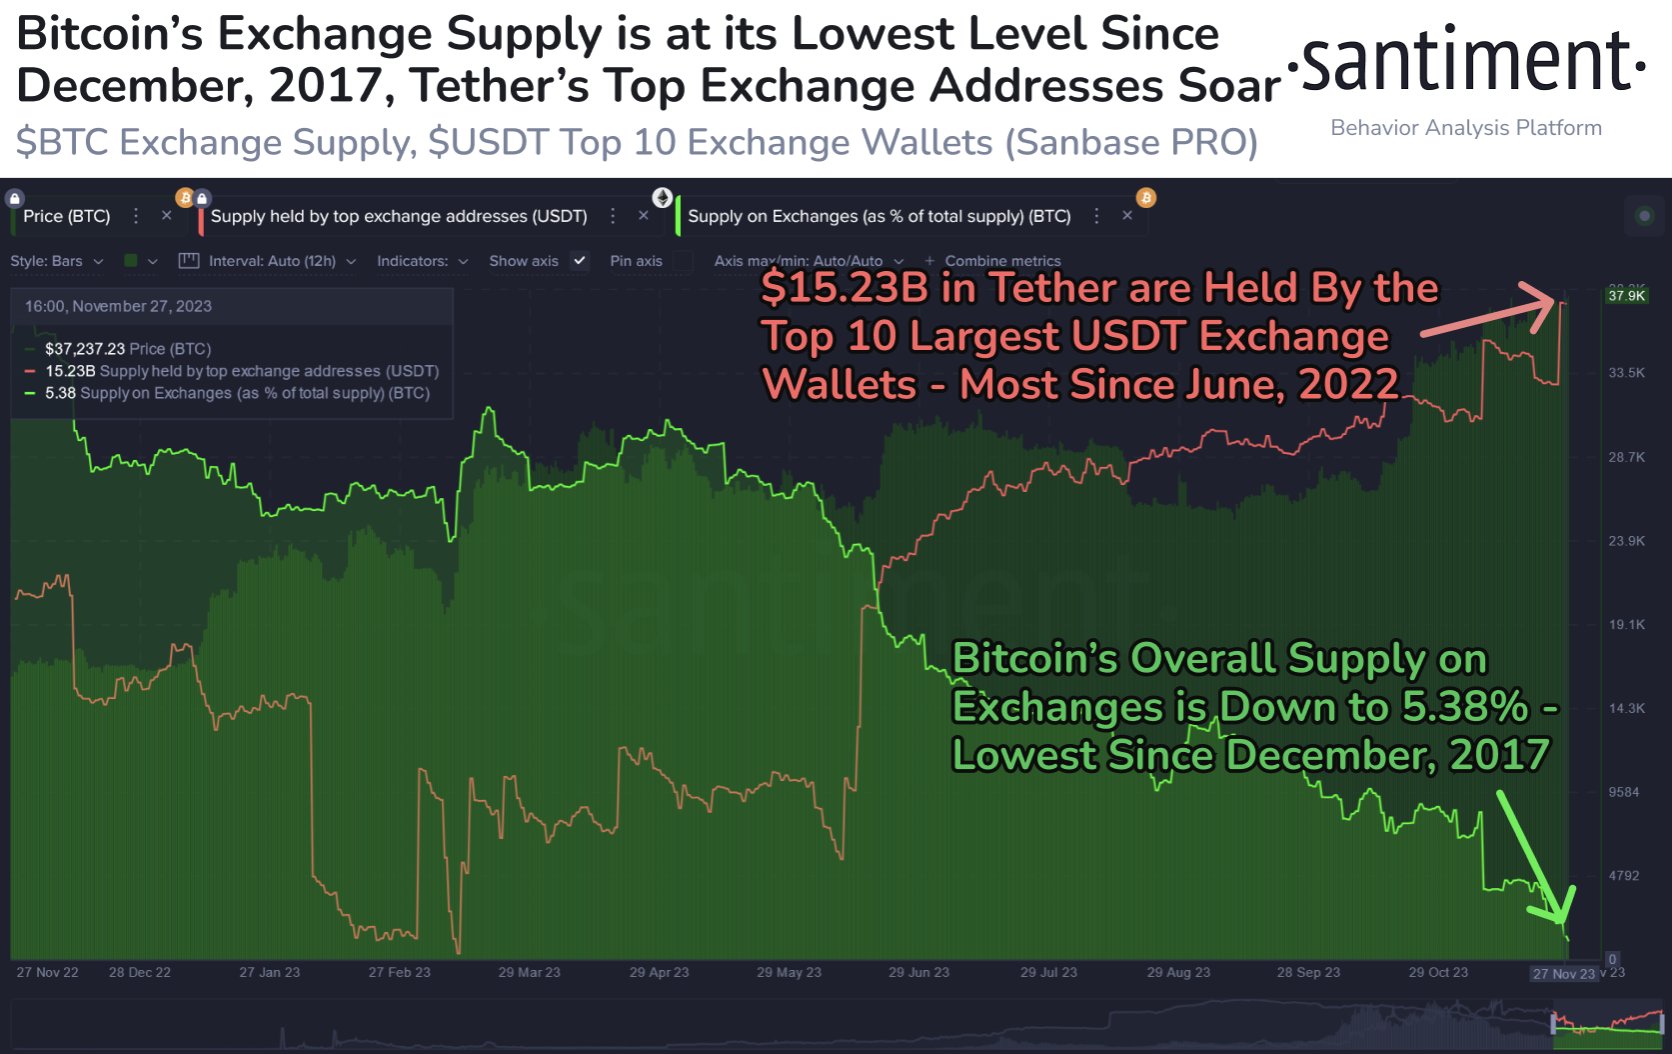 Supply Shock: Bitcoin Exchange Supply Now Lowest Since Dec. 2017